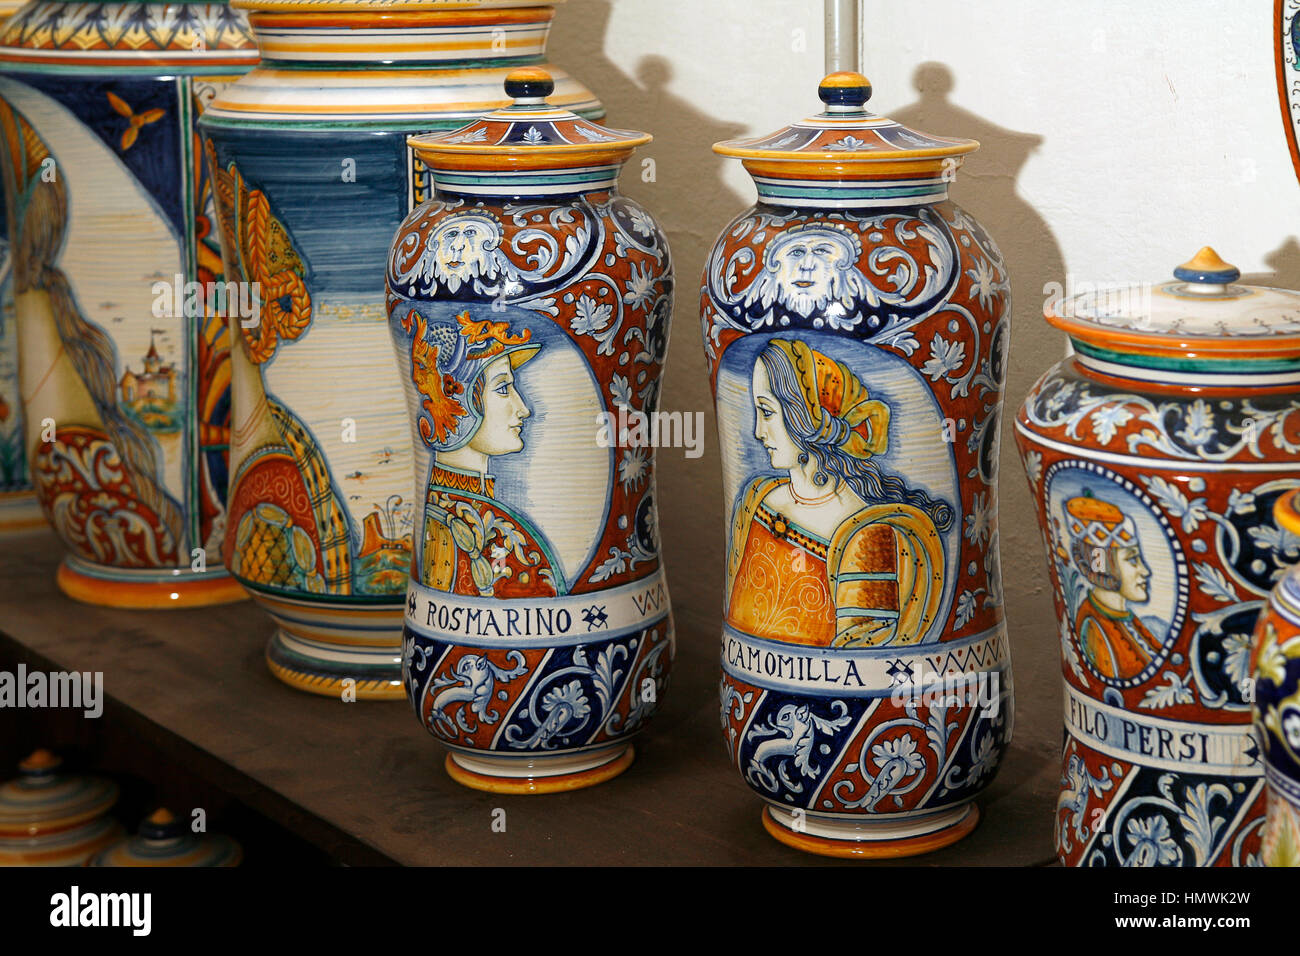 Italy Umbria Deruta potters shops: ceramic objects Exhibitions Stock Photo